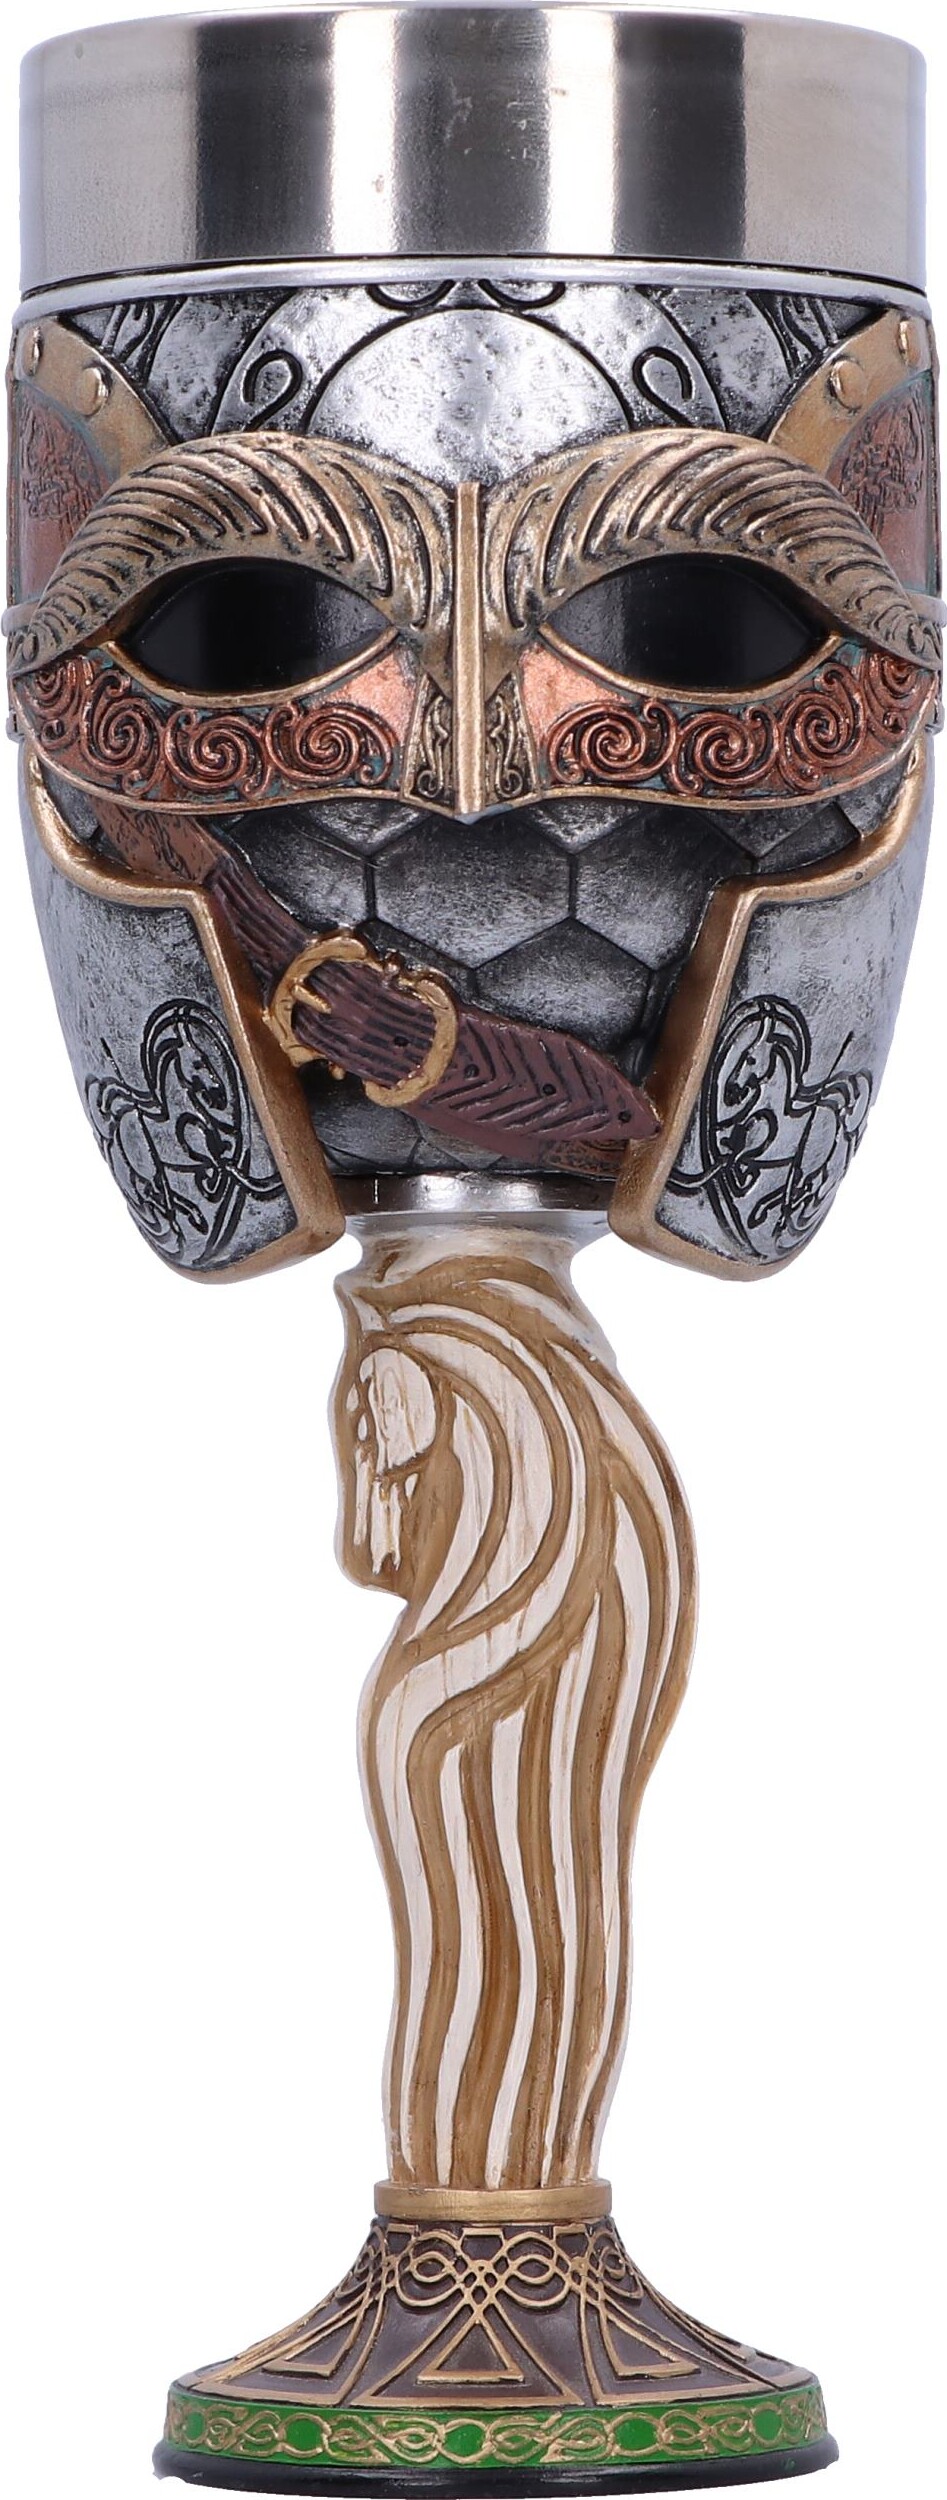 Billede af Lord Of The Rings Replica - Rohan Goblet - Nemesis Now - 19,5 Cm